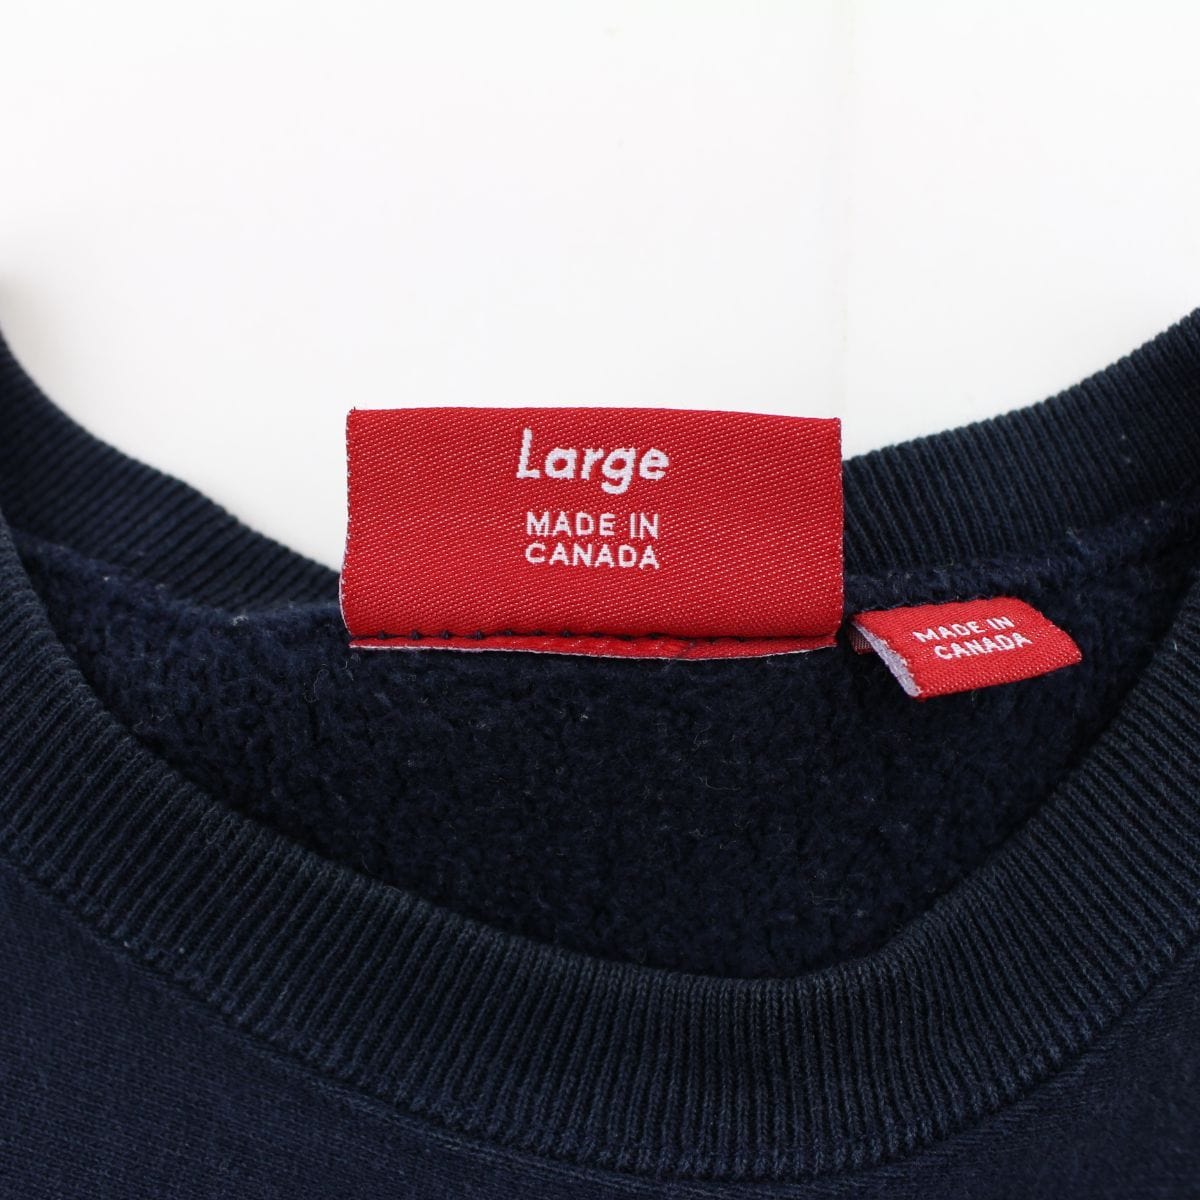 Supreme red on navy box logo crewneck early 2000's - SaruGeneral